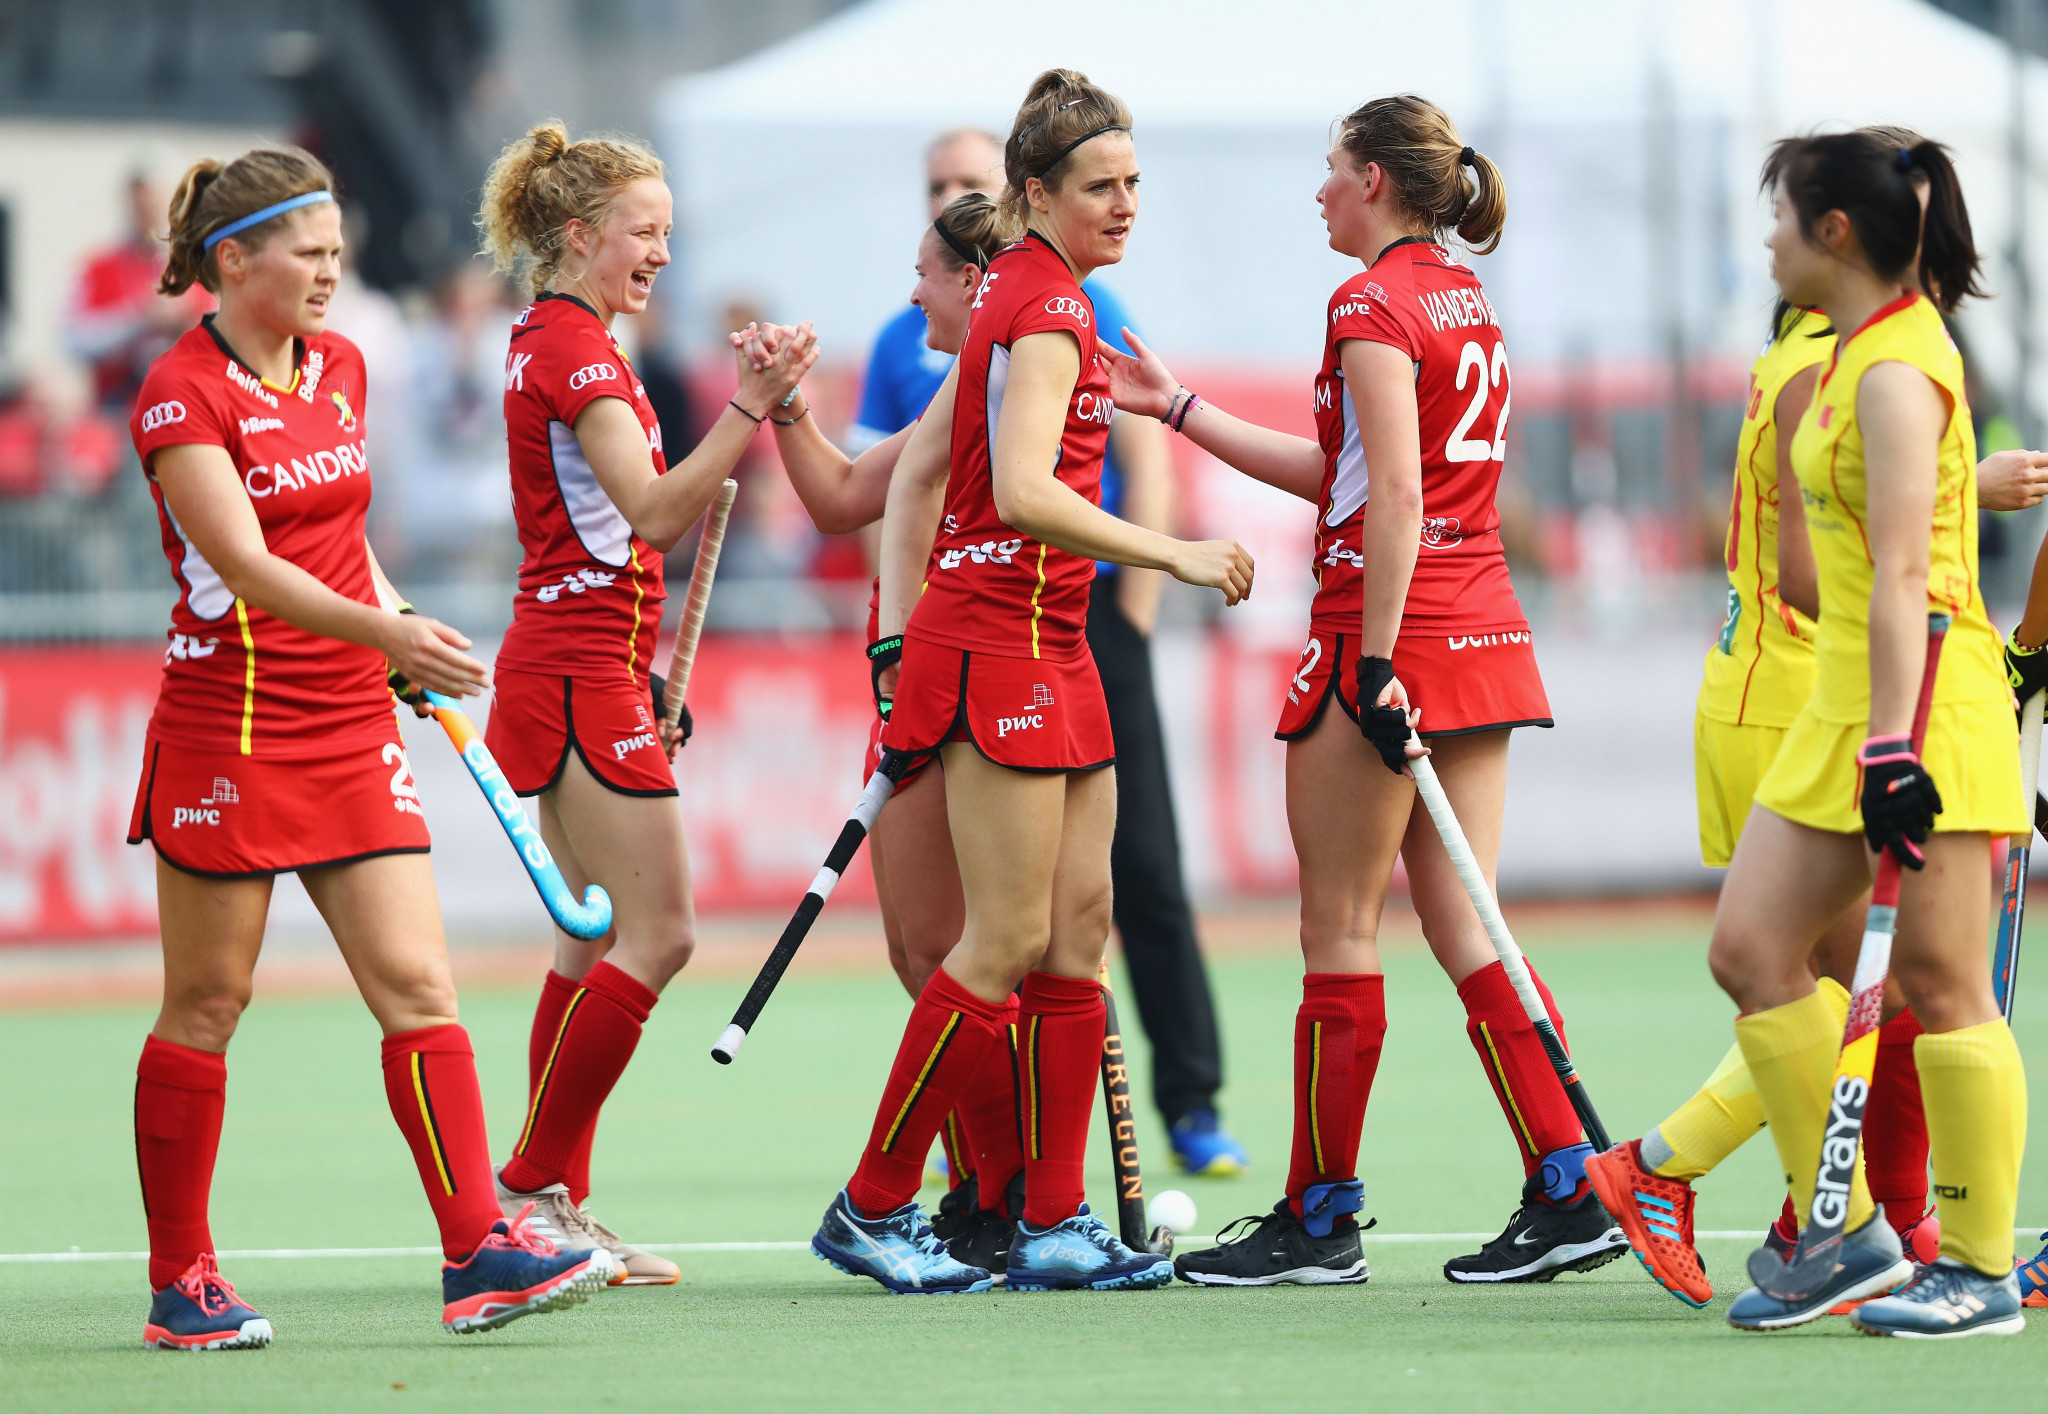 Belgium punch above their weight again in FIH Women's Pro League 